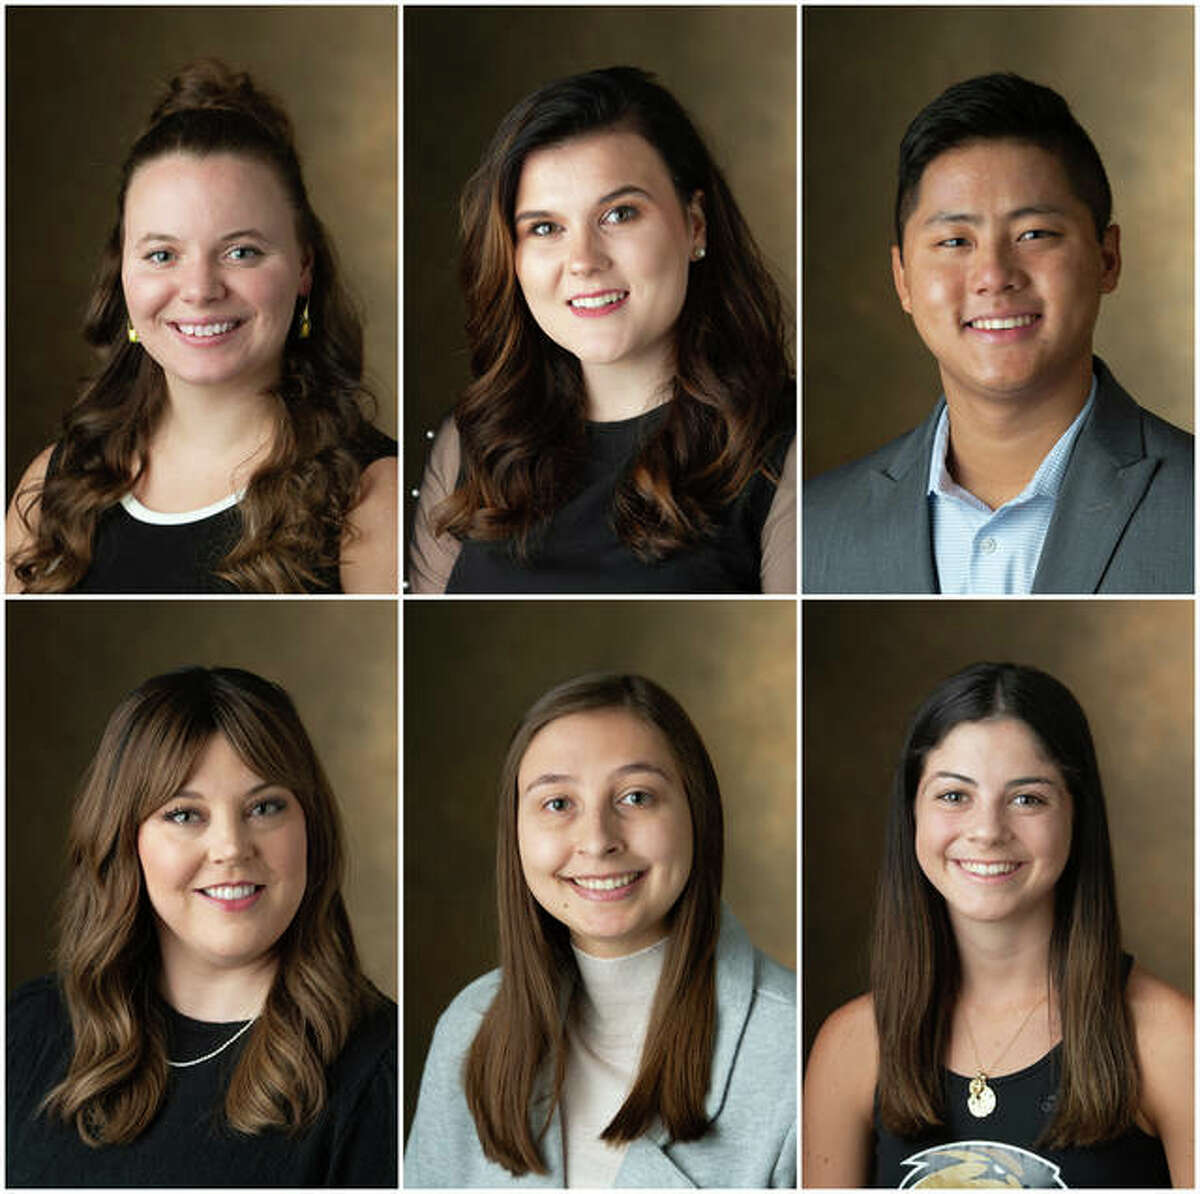 Speakers for the Southern Illinois University Edwardsville 2020 virtual fall commencement exercises at 1 p.m. Friday Dec. 1 include, from left, top row, Cassidy Bruns, Paulina Fuhrmann and Matthew Gregor; bottom row, Caitlin Phelan, Ashley Spain and Laura Tupper.